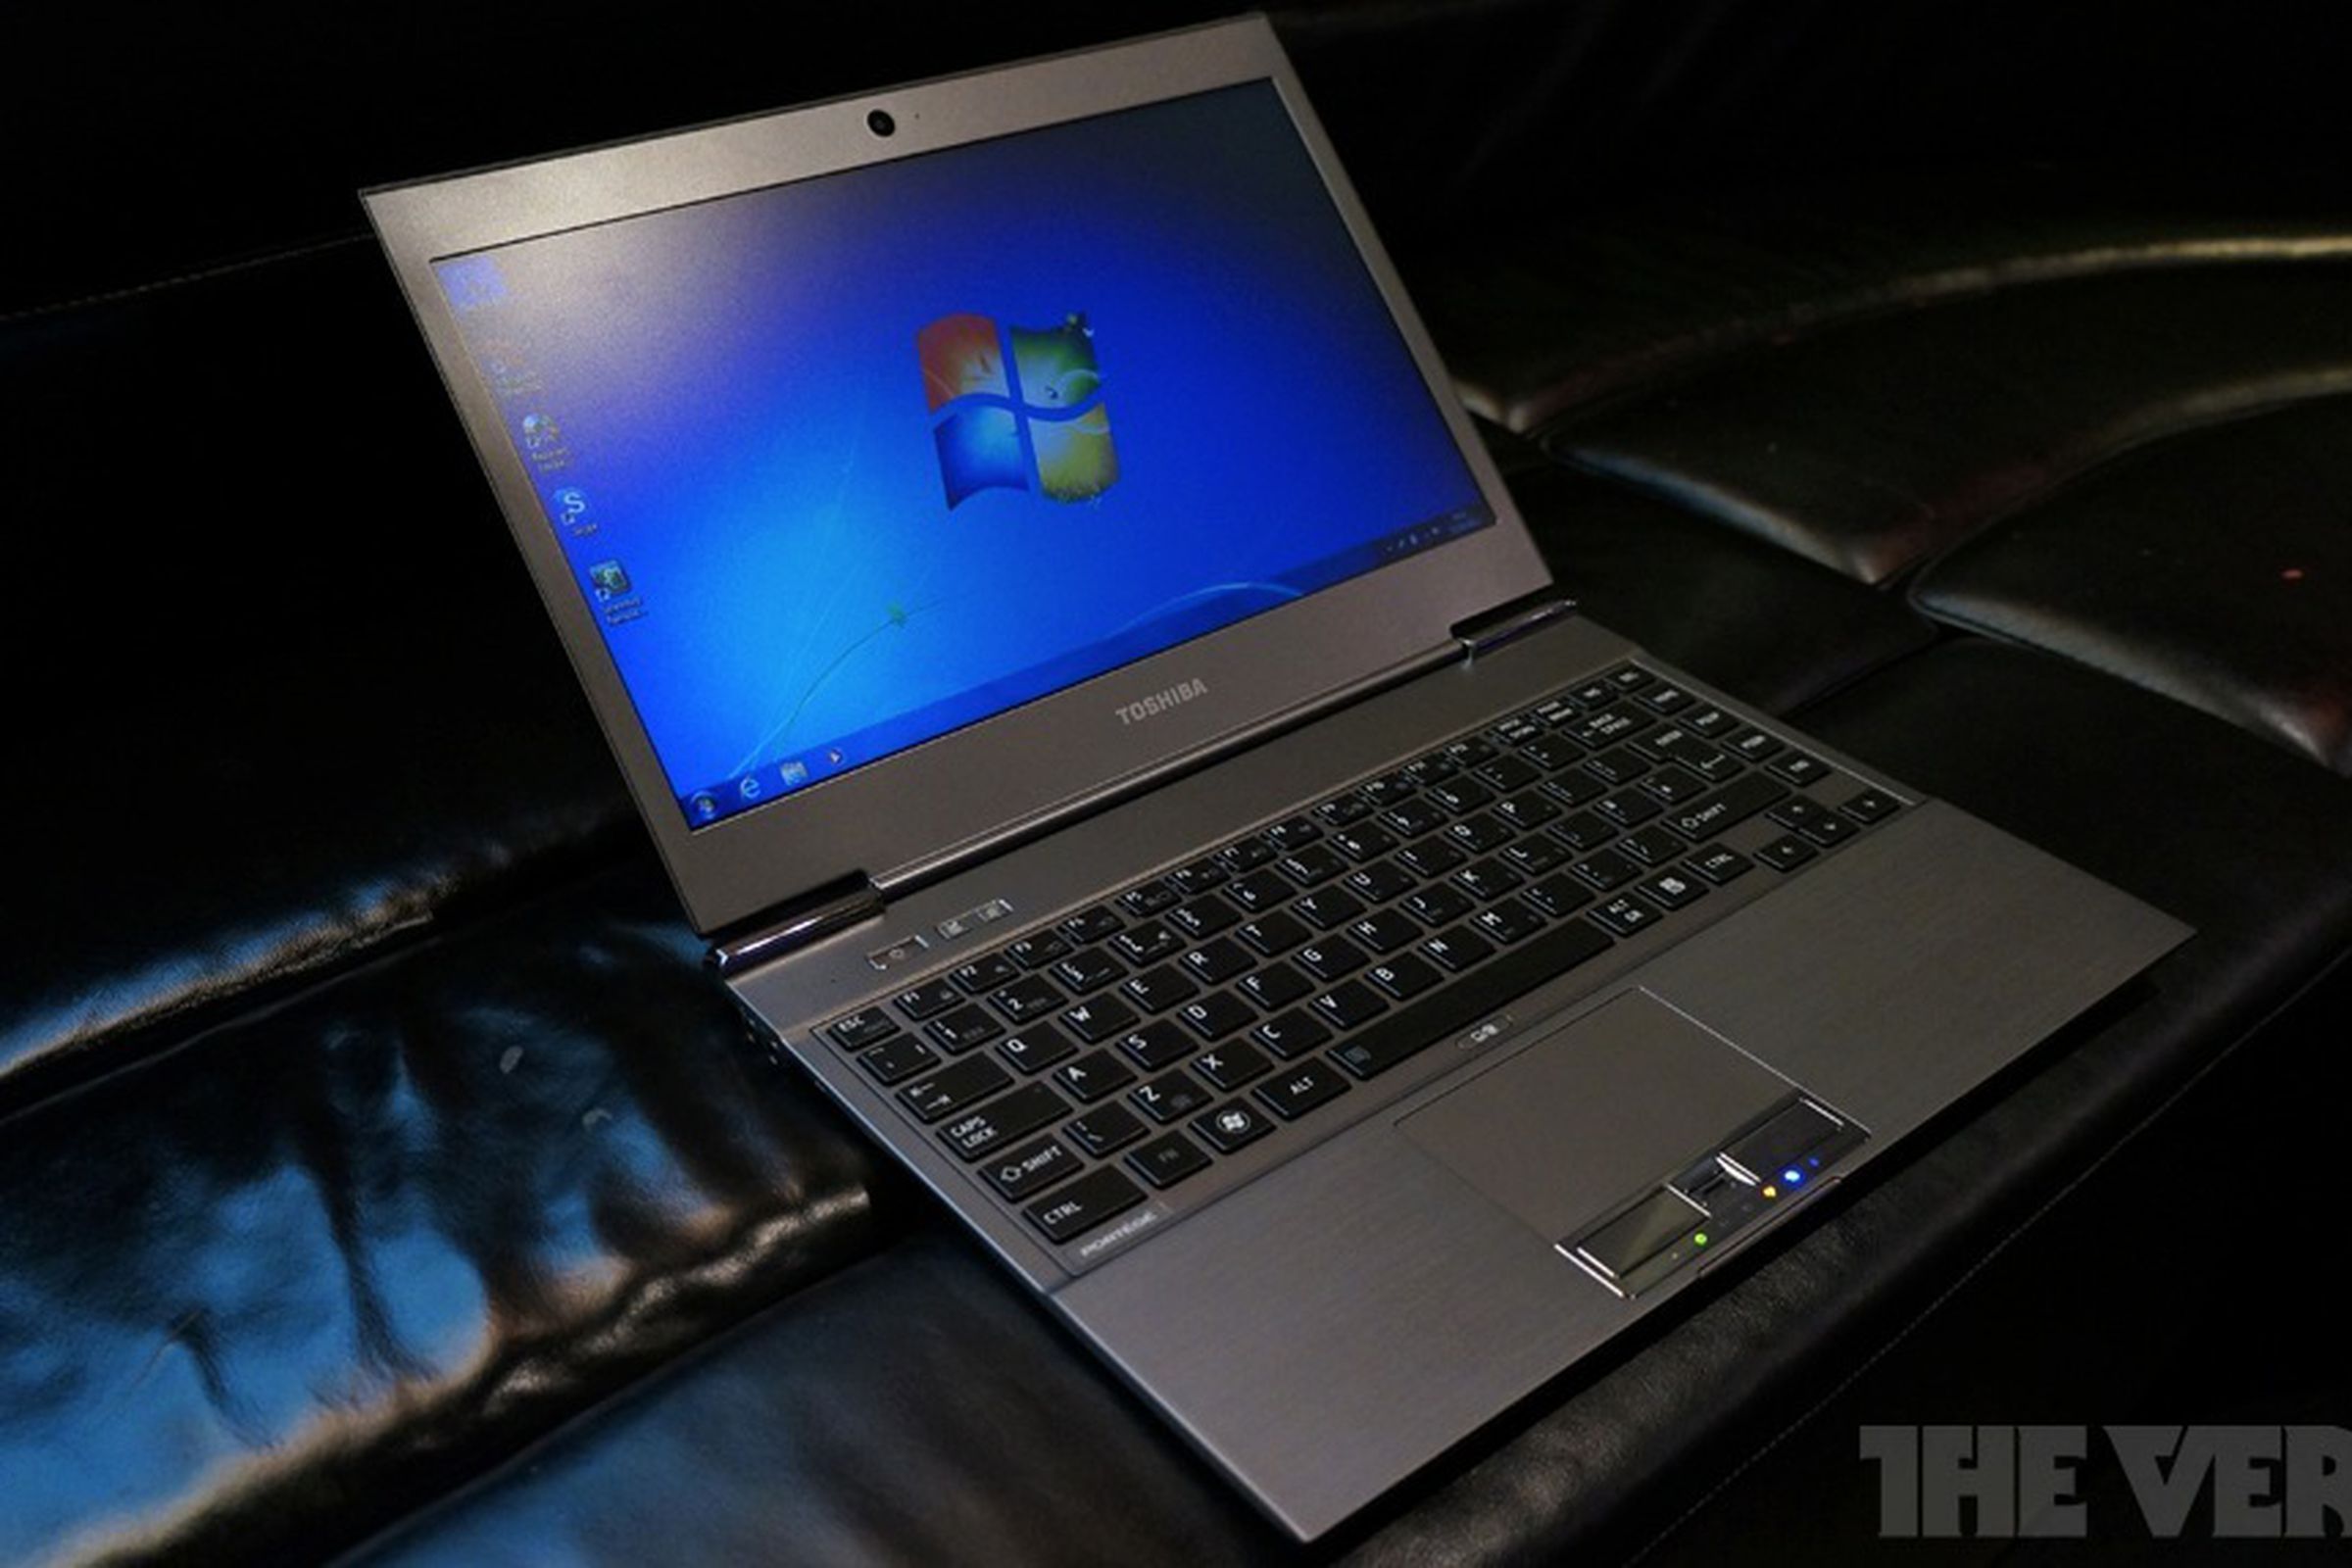 Gallery Photo: Toshiba Portege Z930 hands-on pictures